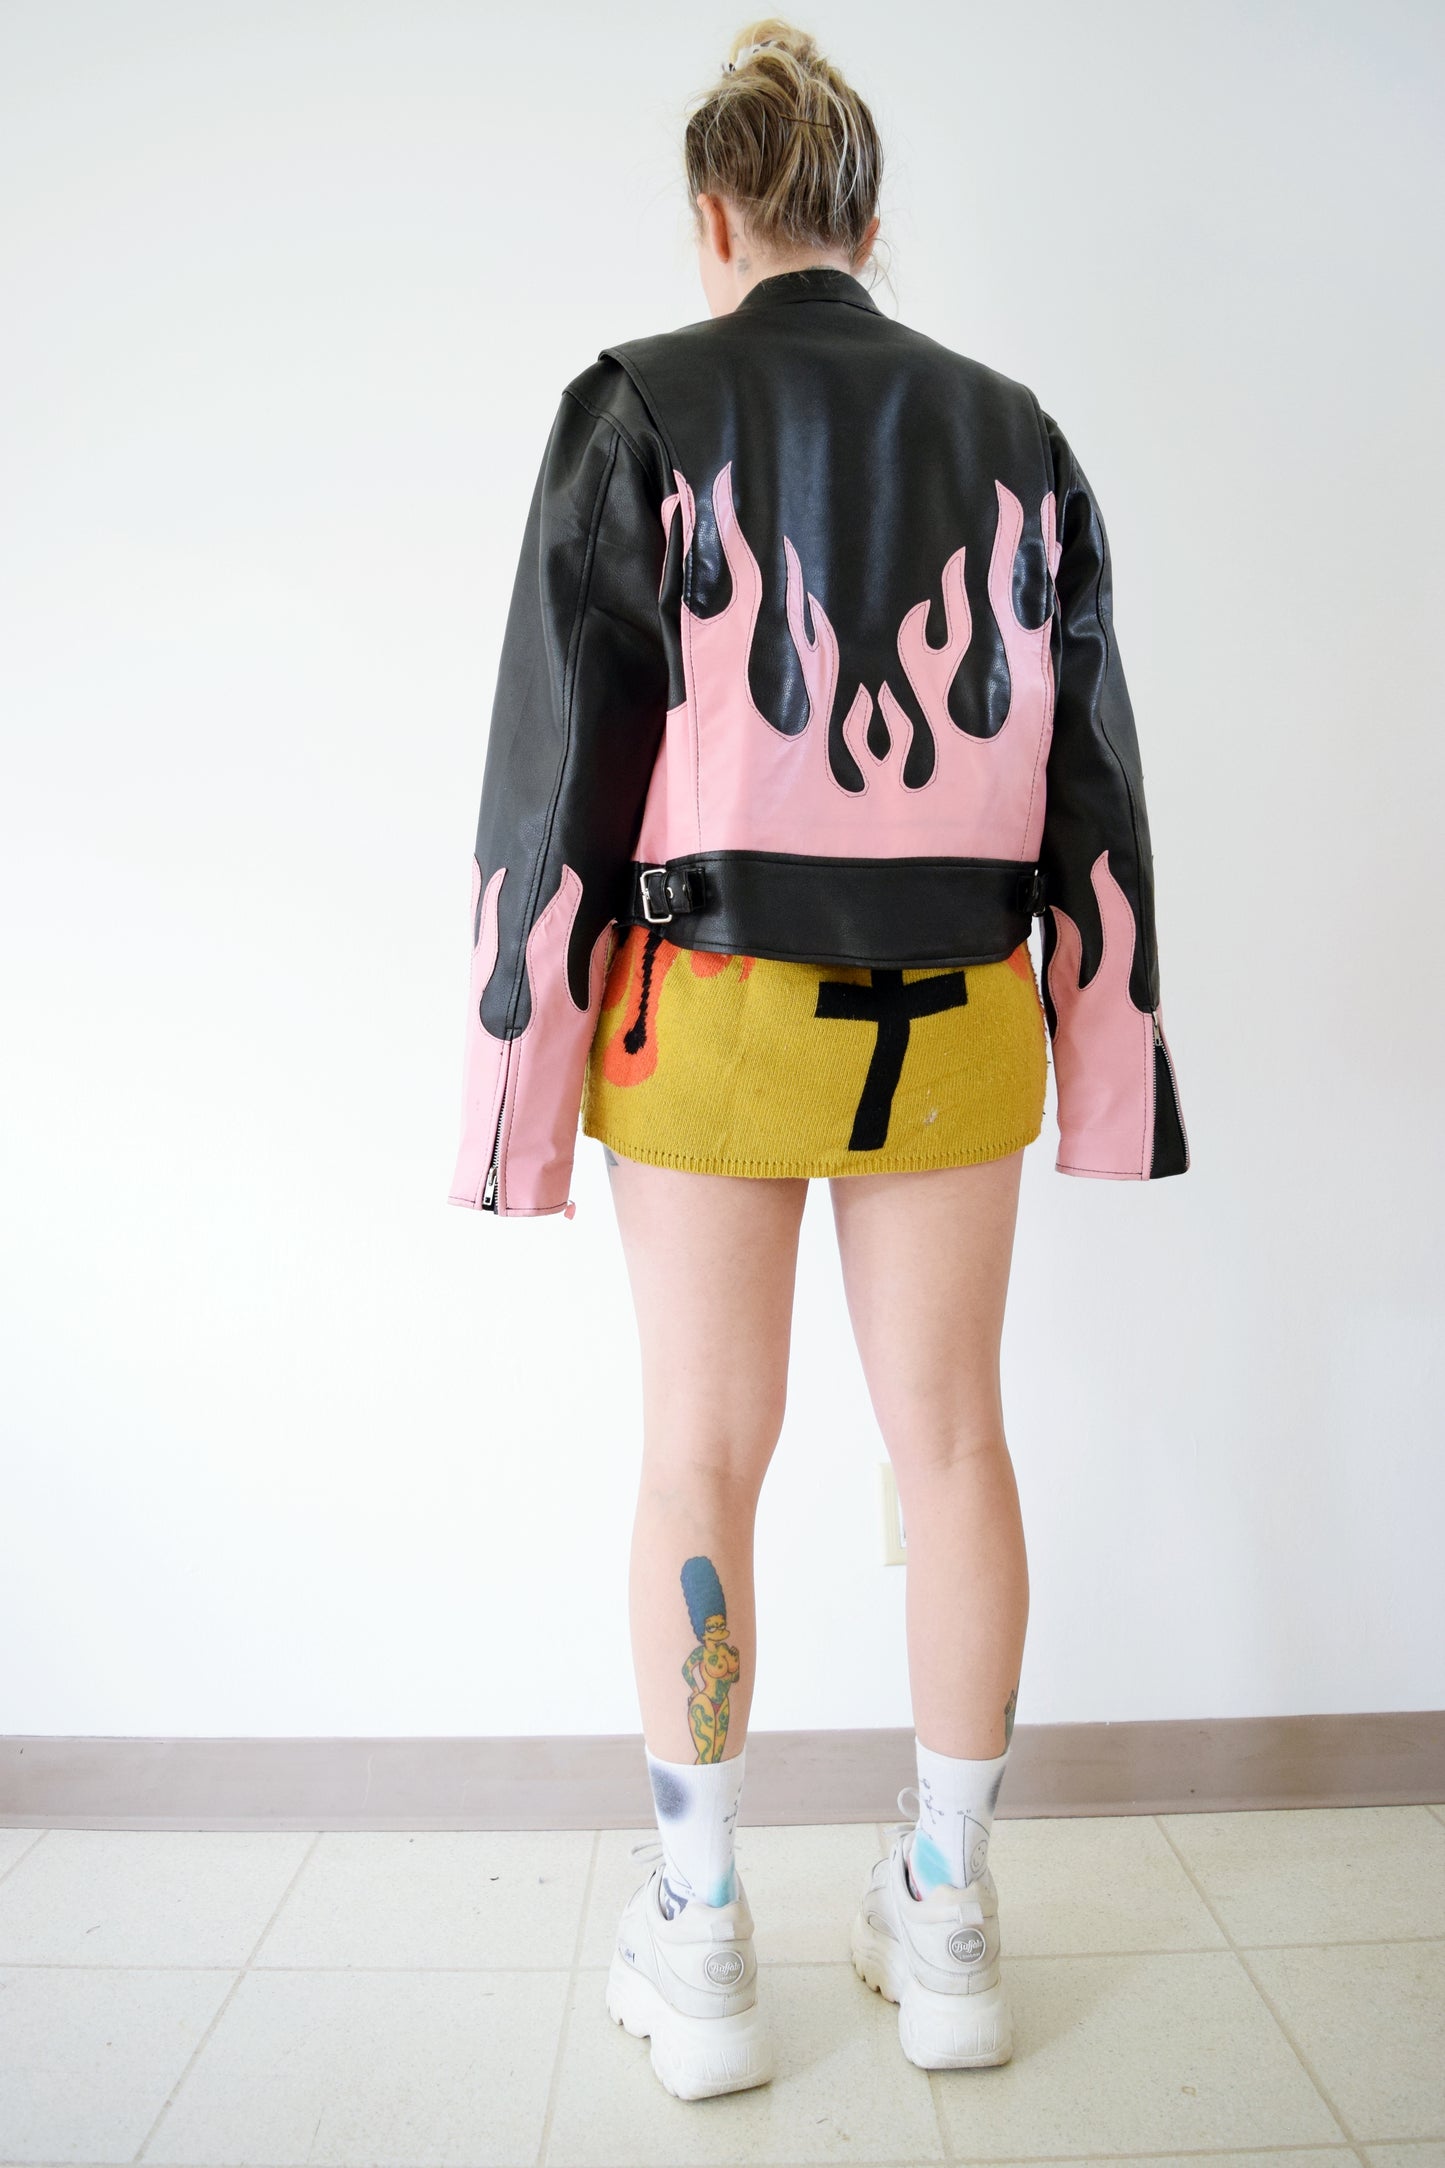 PINK FLAME PLEATHER JACKET - S/M